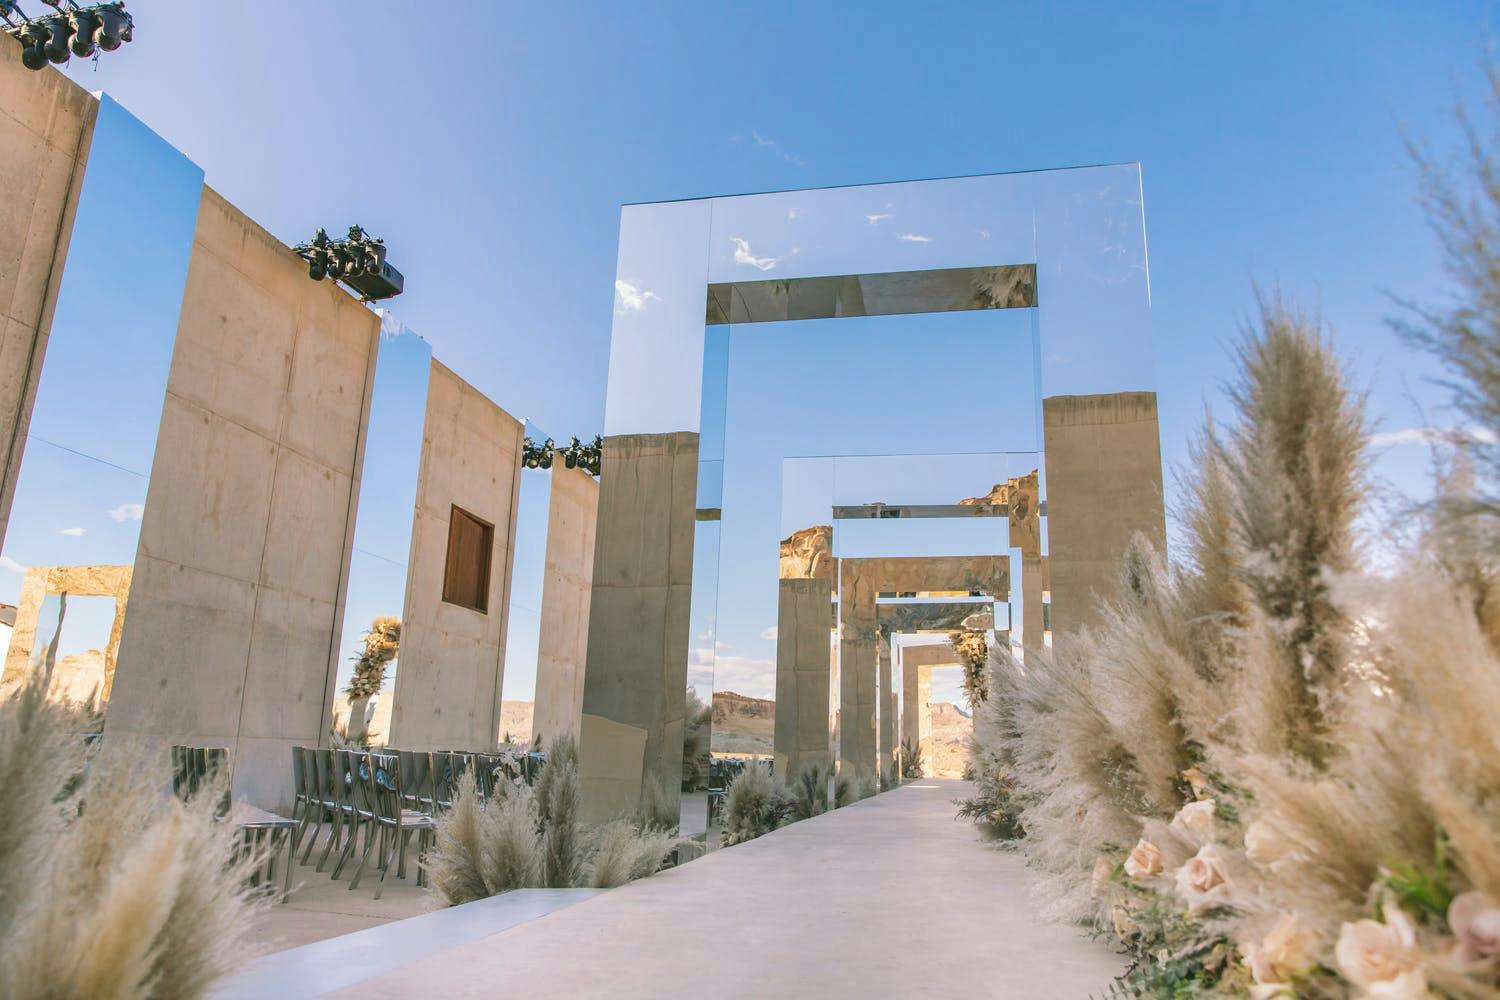 Wedding aisle lined with mirrored archways and pampas grass in desert landscape | PartySlate